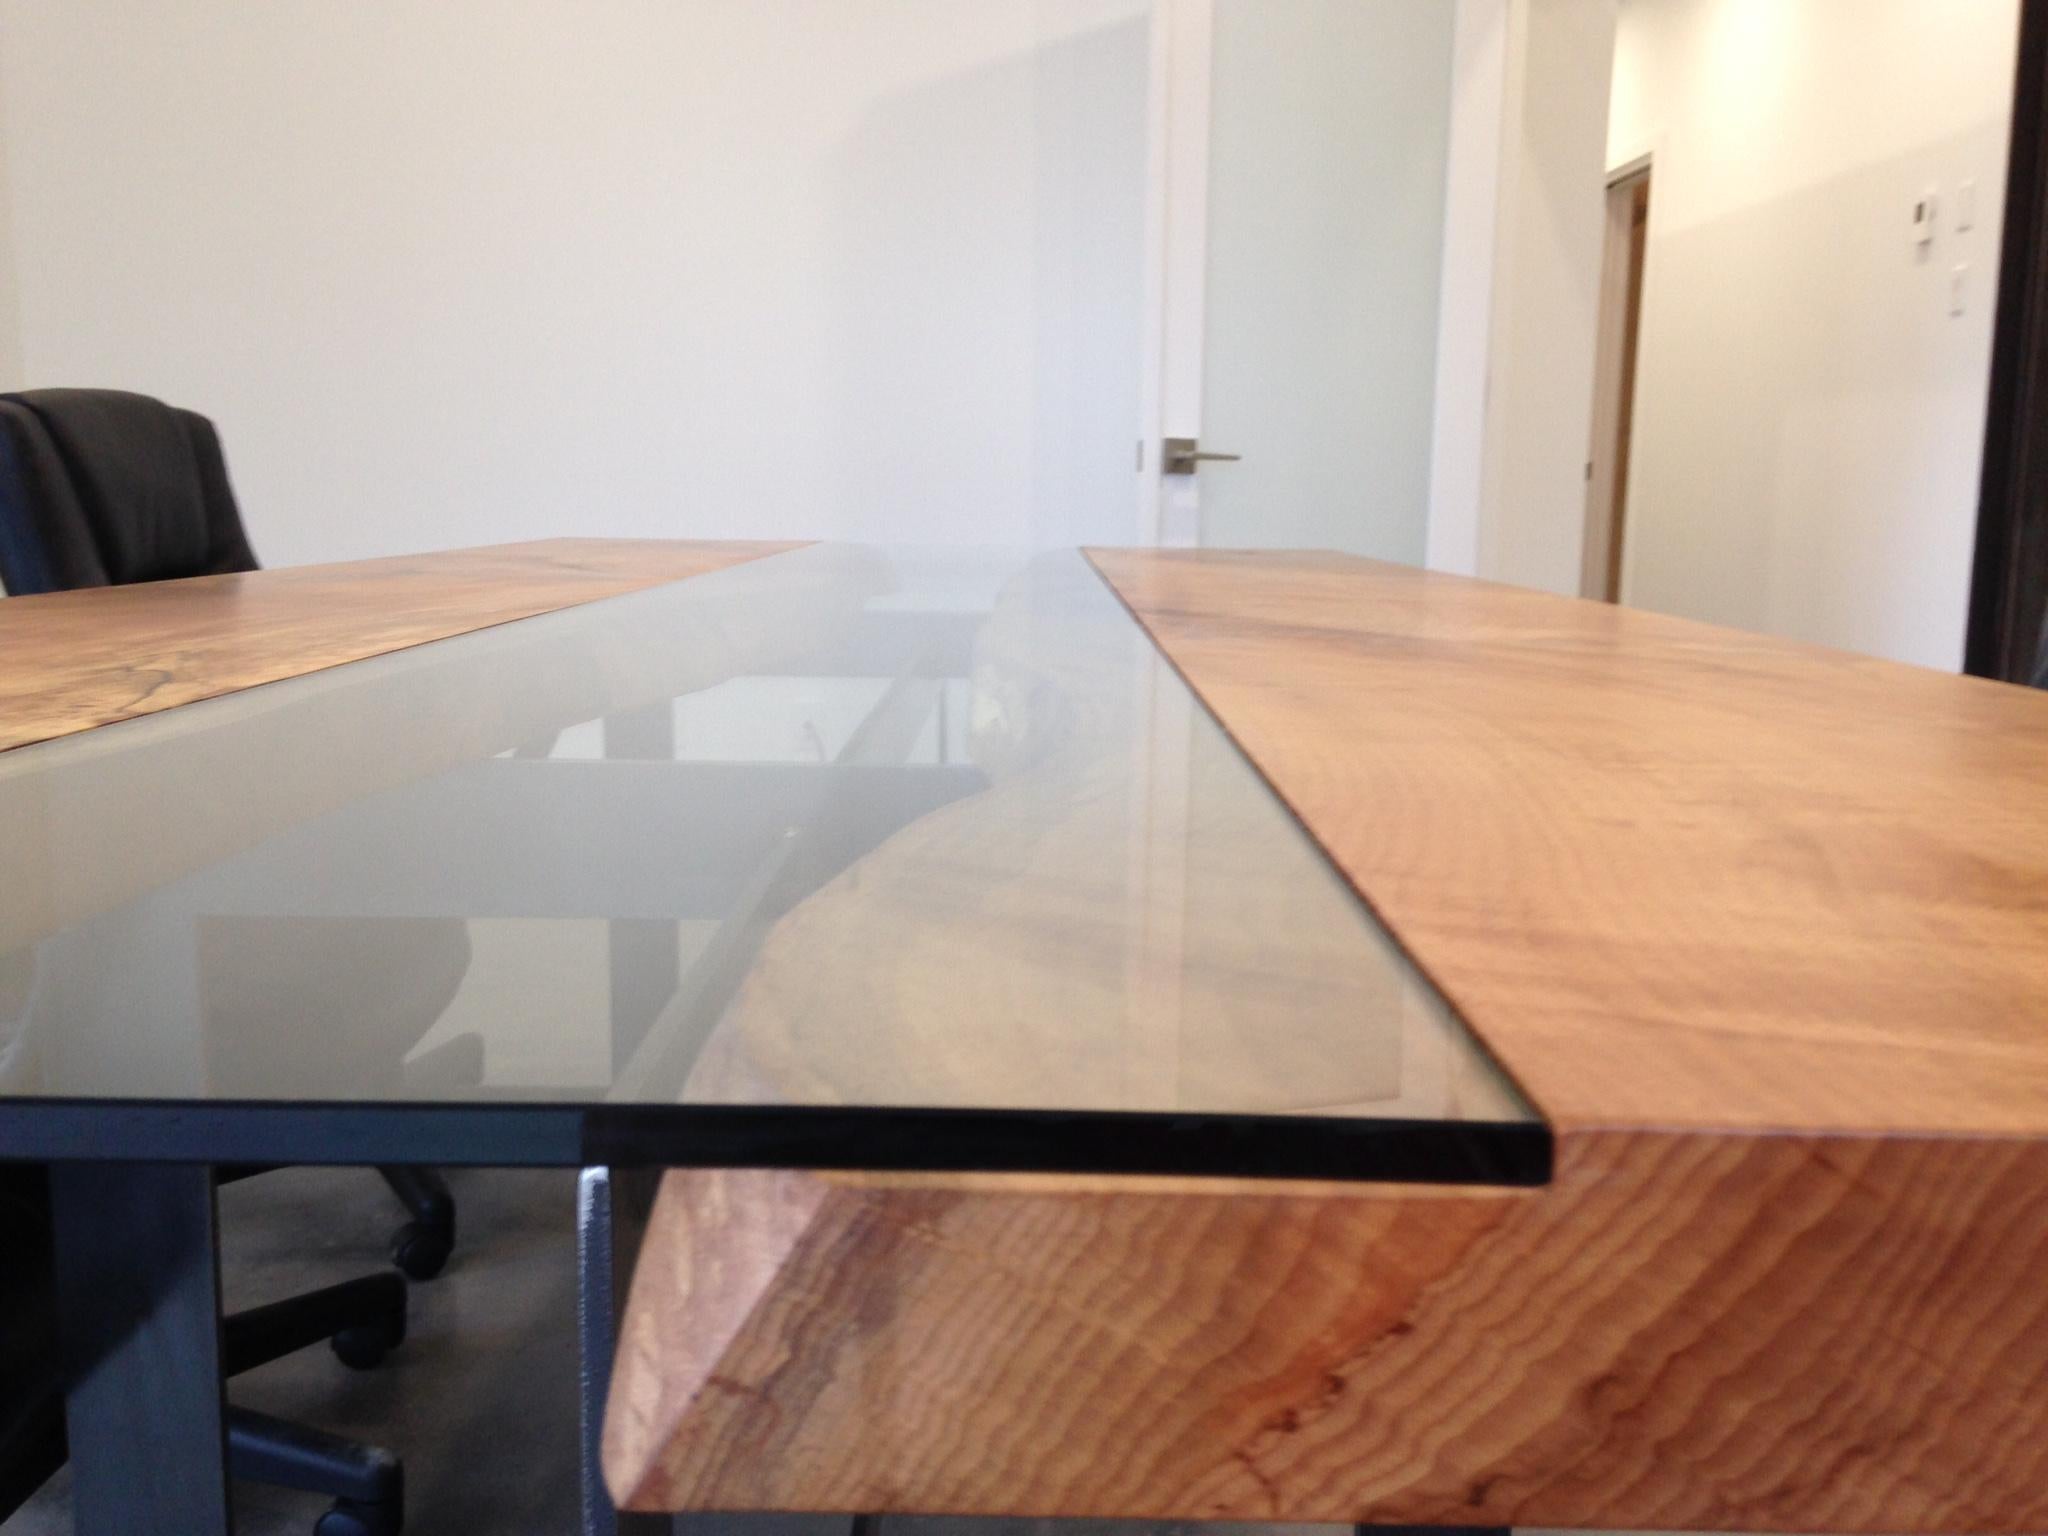 This is a beautiful beech conference table with a central tempered glass on steel legs. We use the live edge facing each other. We let nature design with the curves, cracks and holes and our role is to protect the beauty by offering you one of the